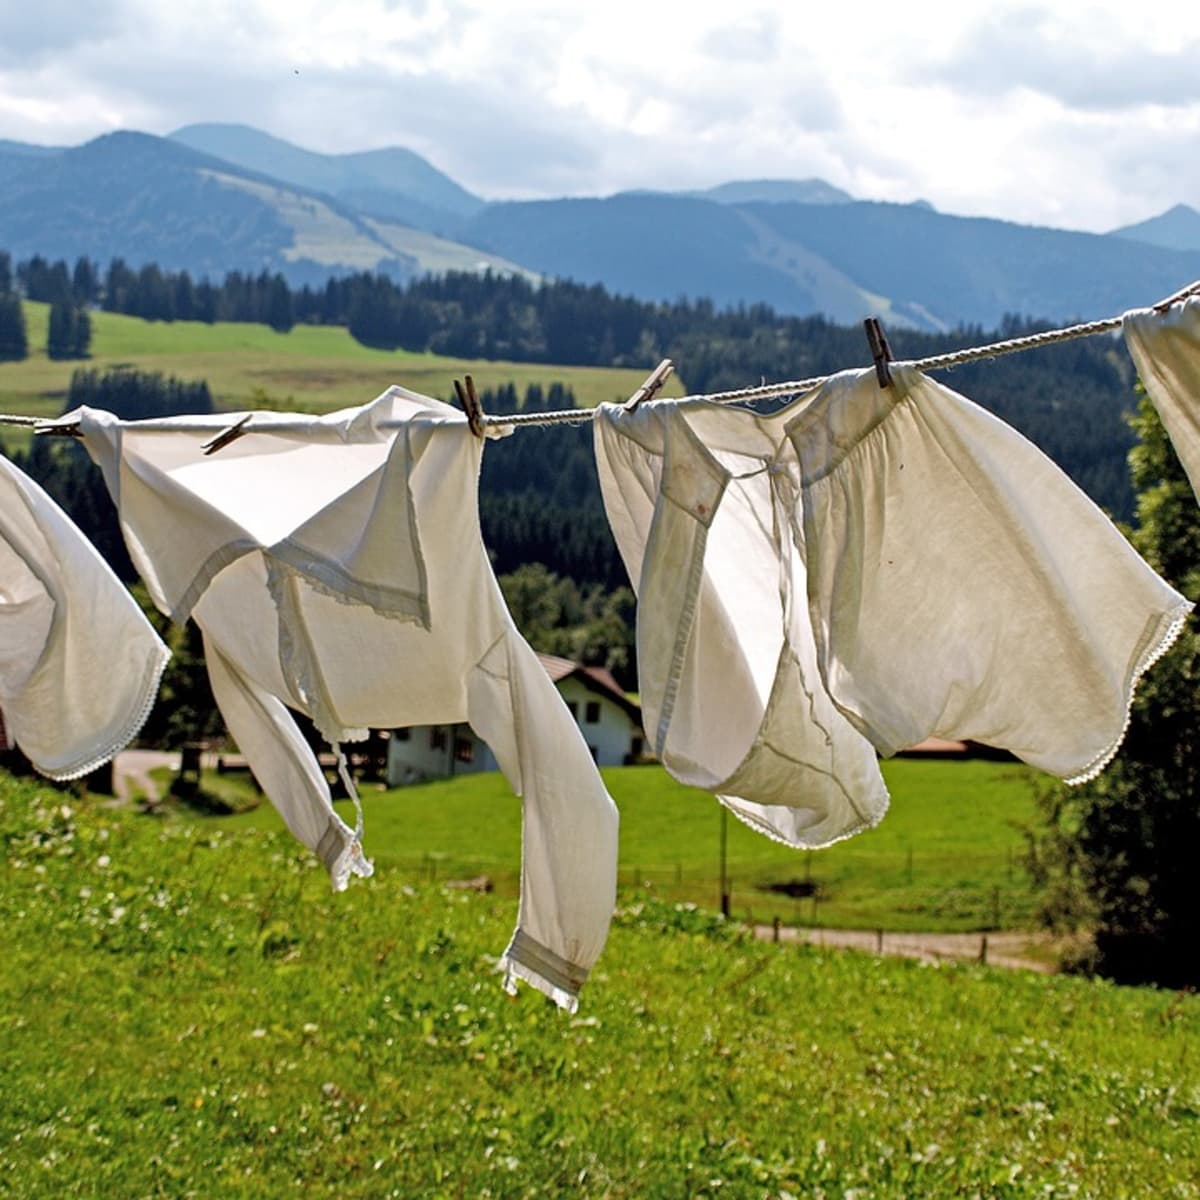 How to Speed Up the Drying Process for Clothes During Winter